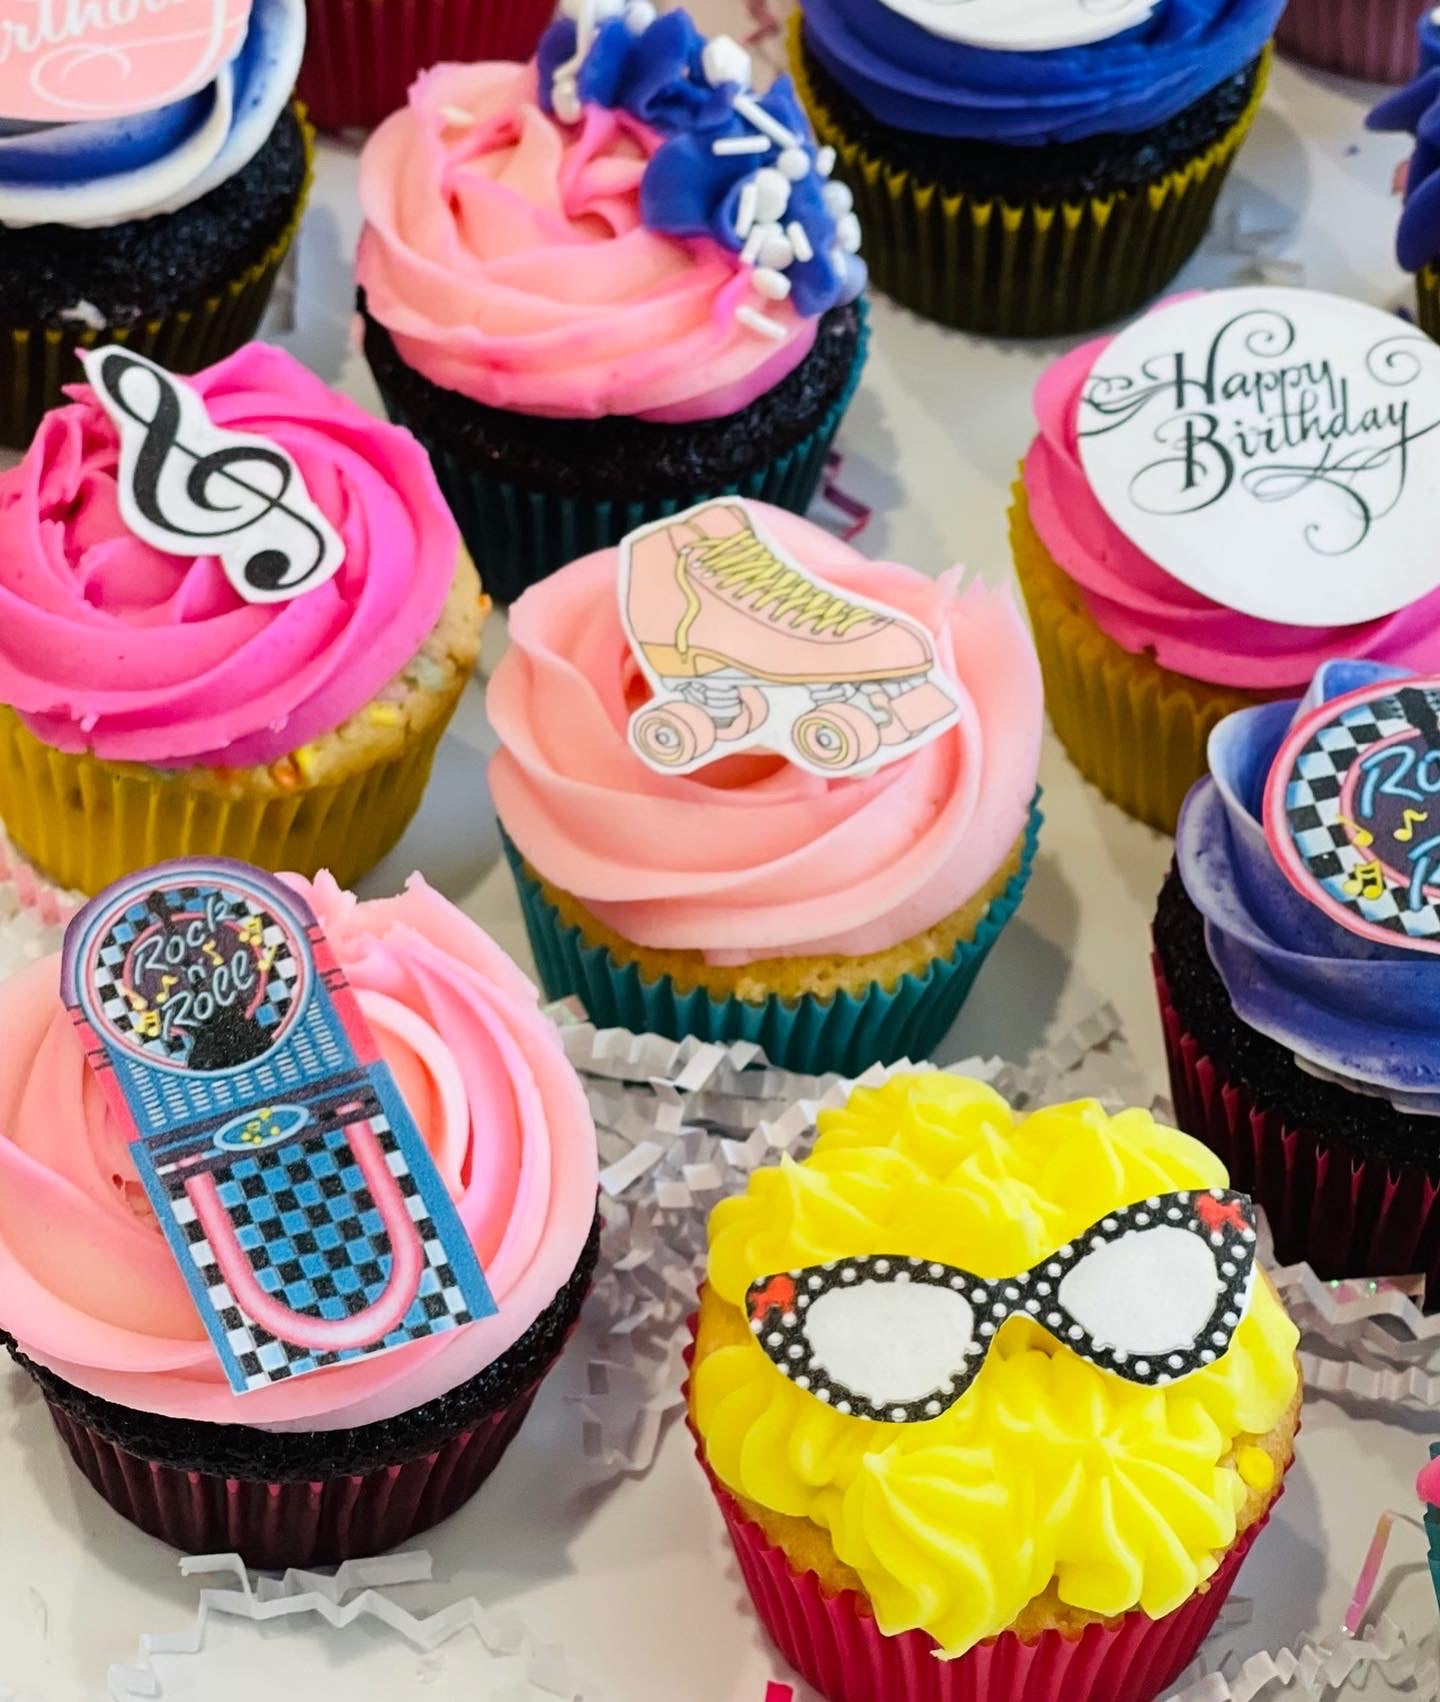 Rock & Roll Bday Cupcakes